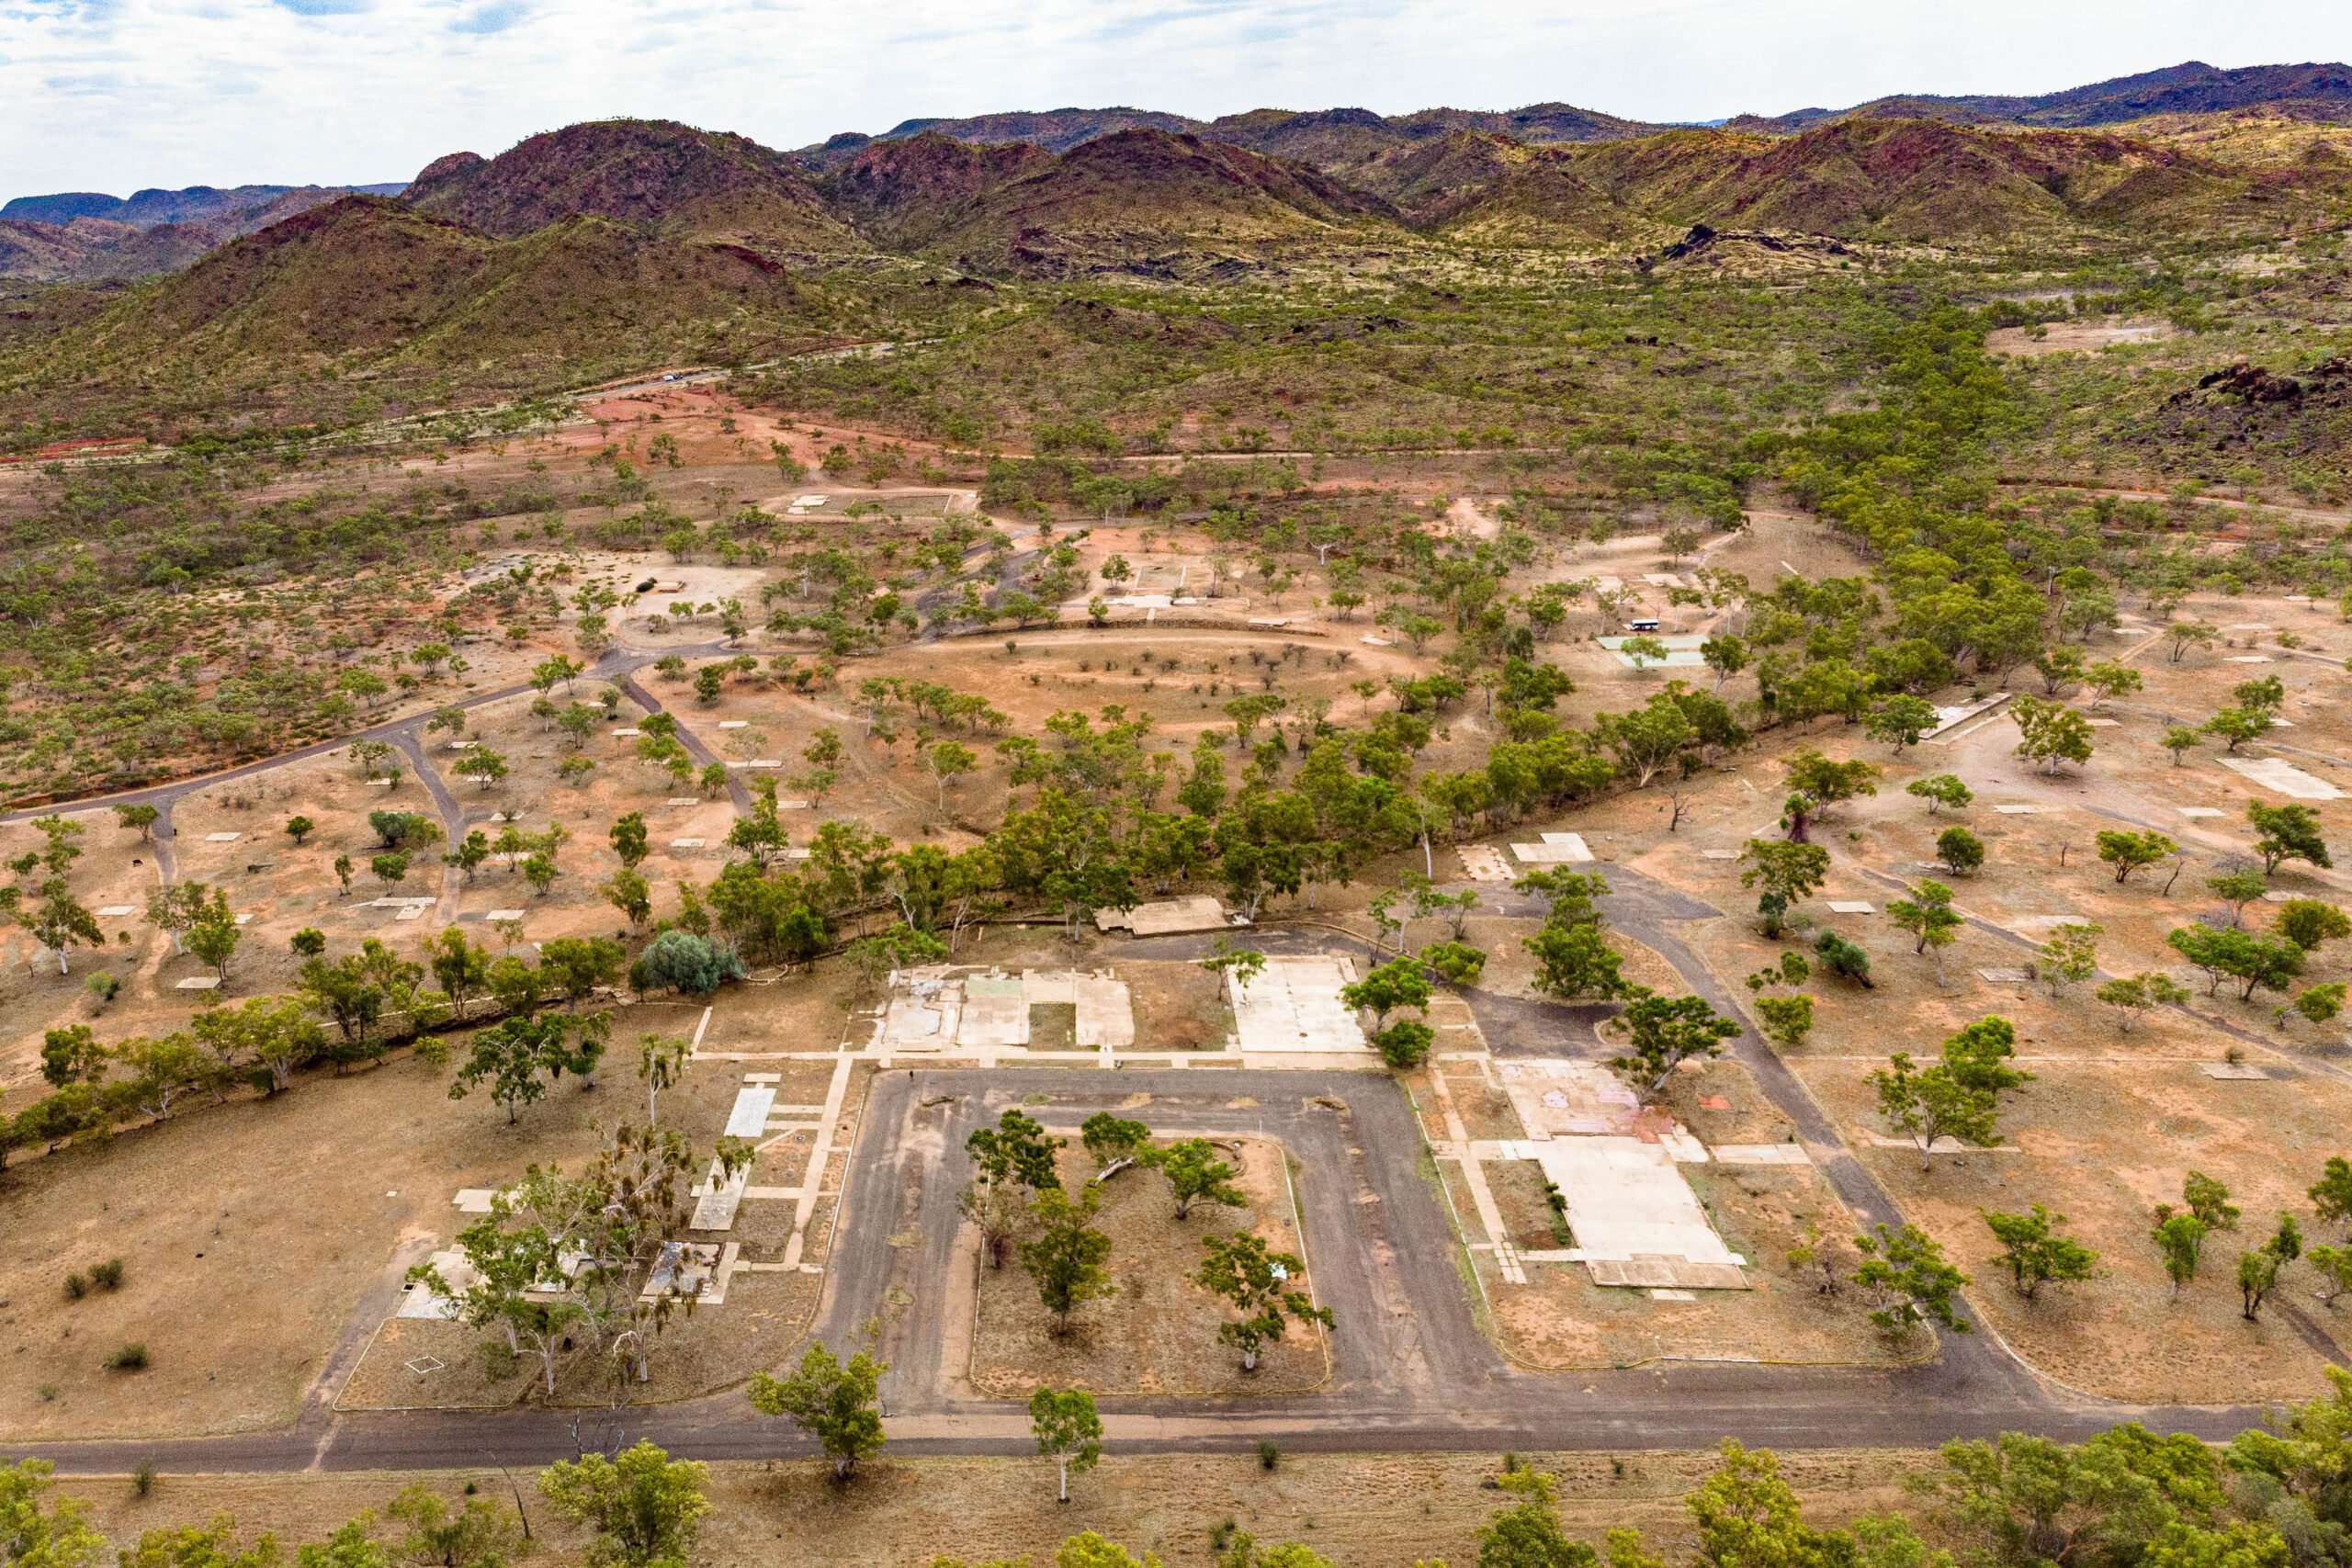 Image for article: The outback Qld town that was sold for parts